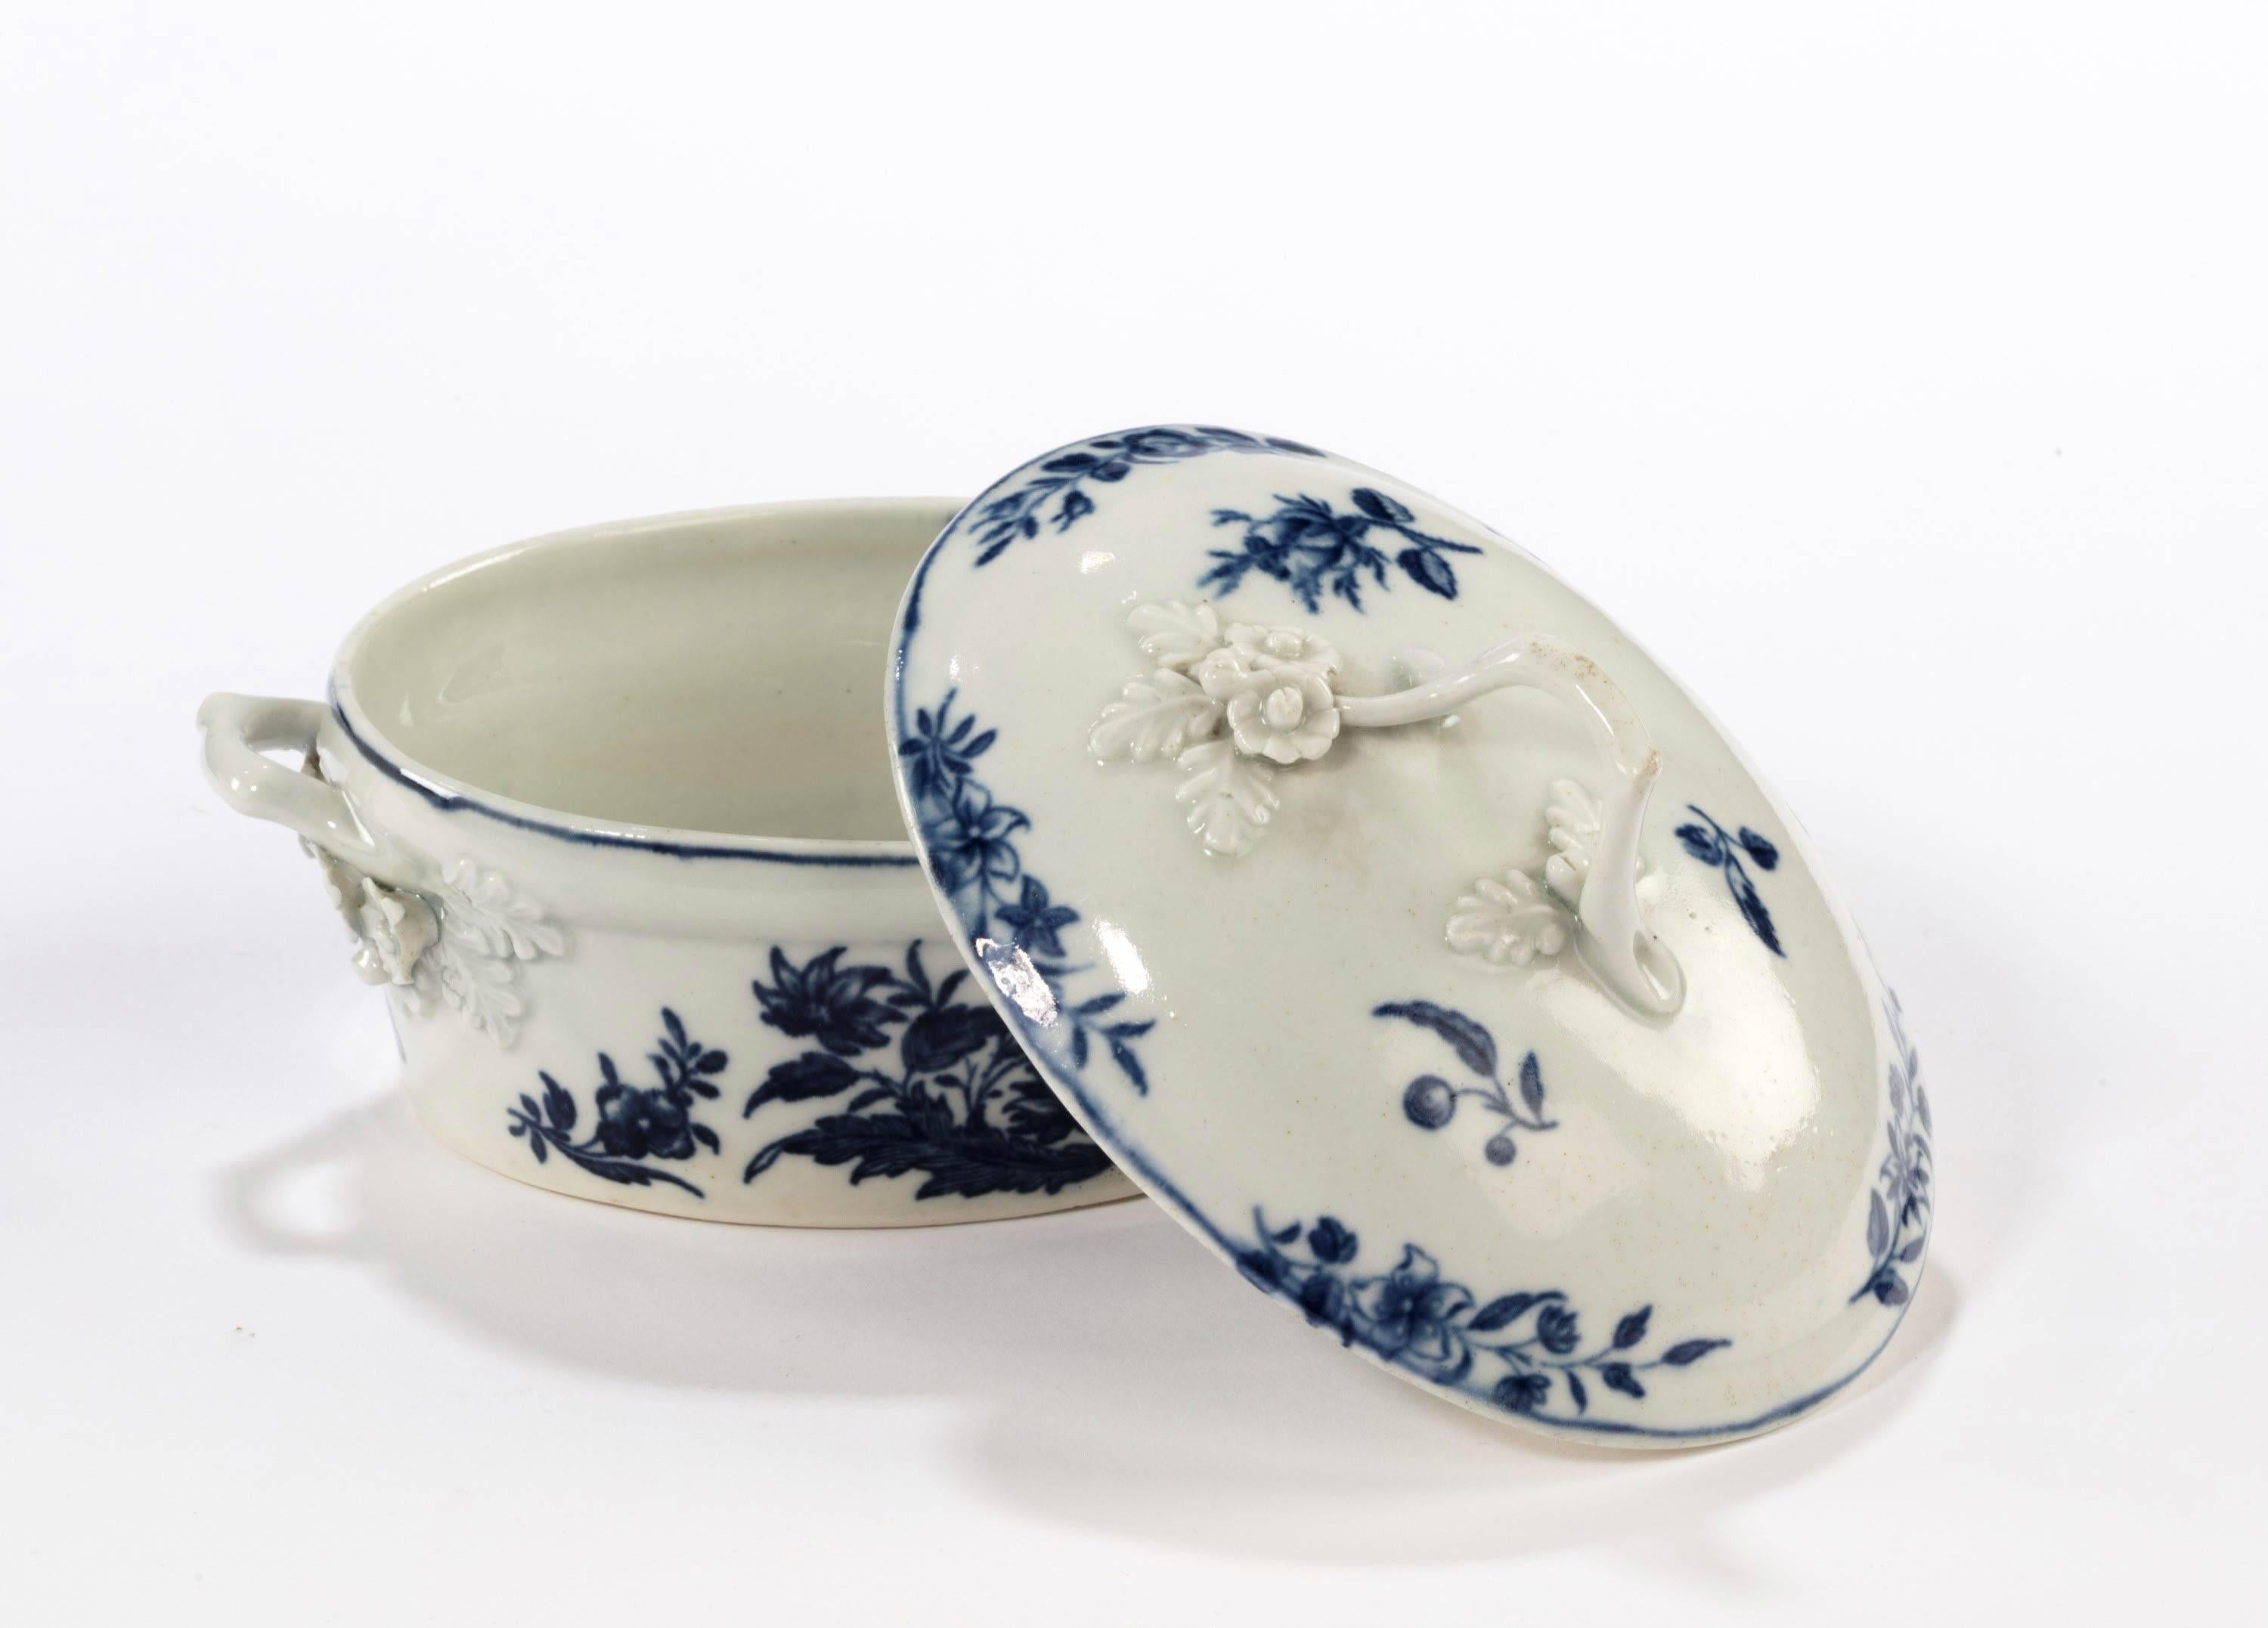 A good first period Worcester blue and white printed oval butter tub cover and stand. Printed with the rose centered spray group pattern. The stand 1775. Ex private collection. 

The dish measures:

Height 1 inch
Width 7.25 inches
Depth 5.25